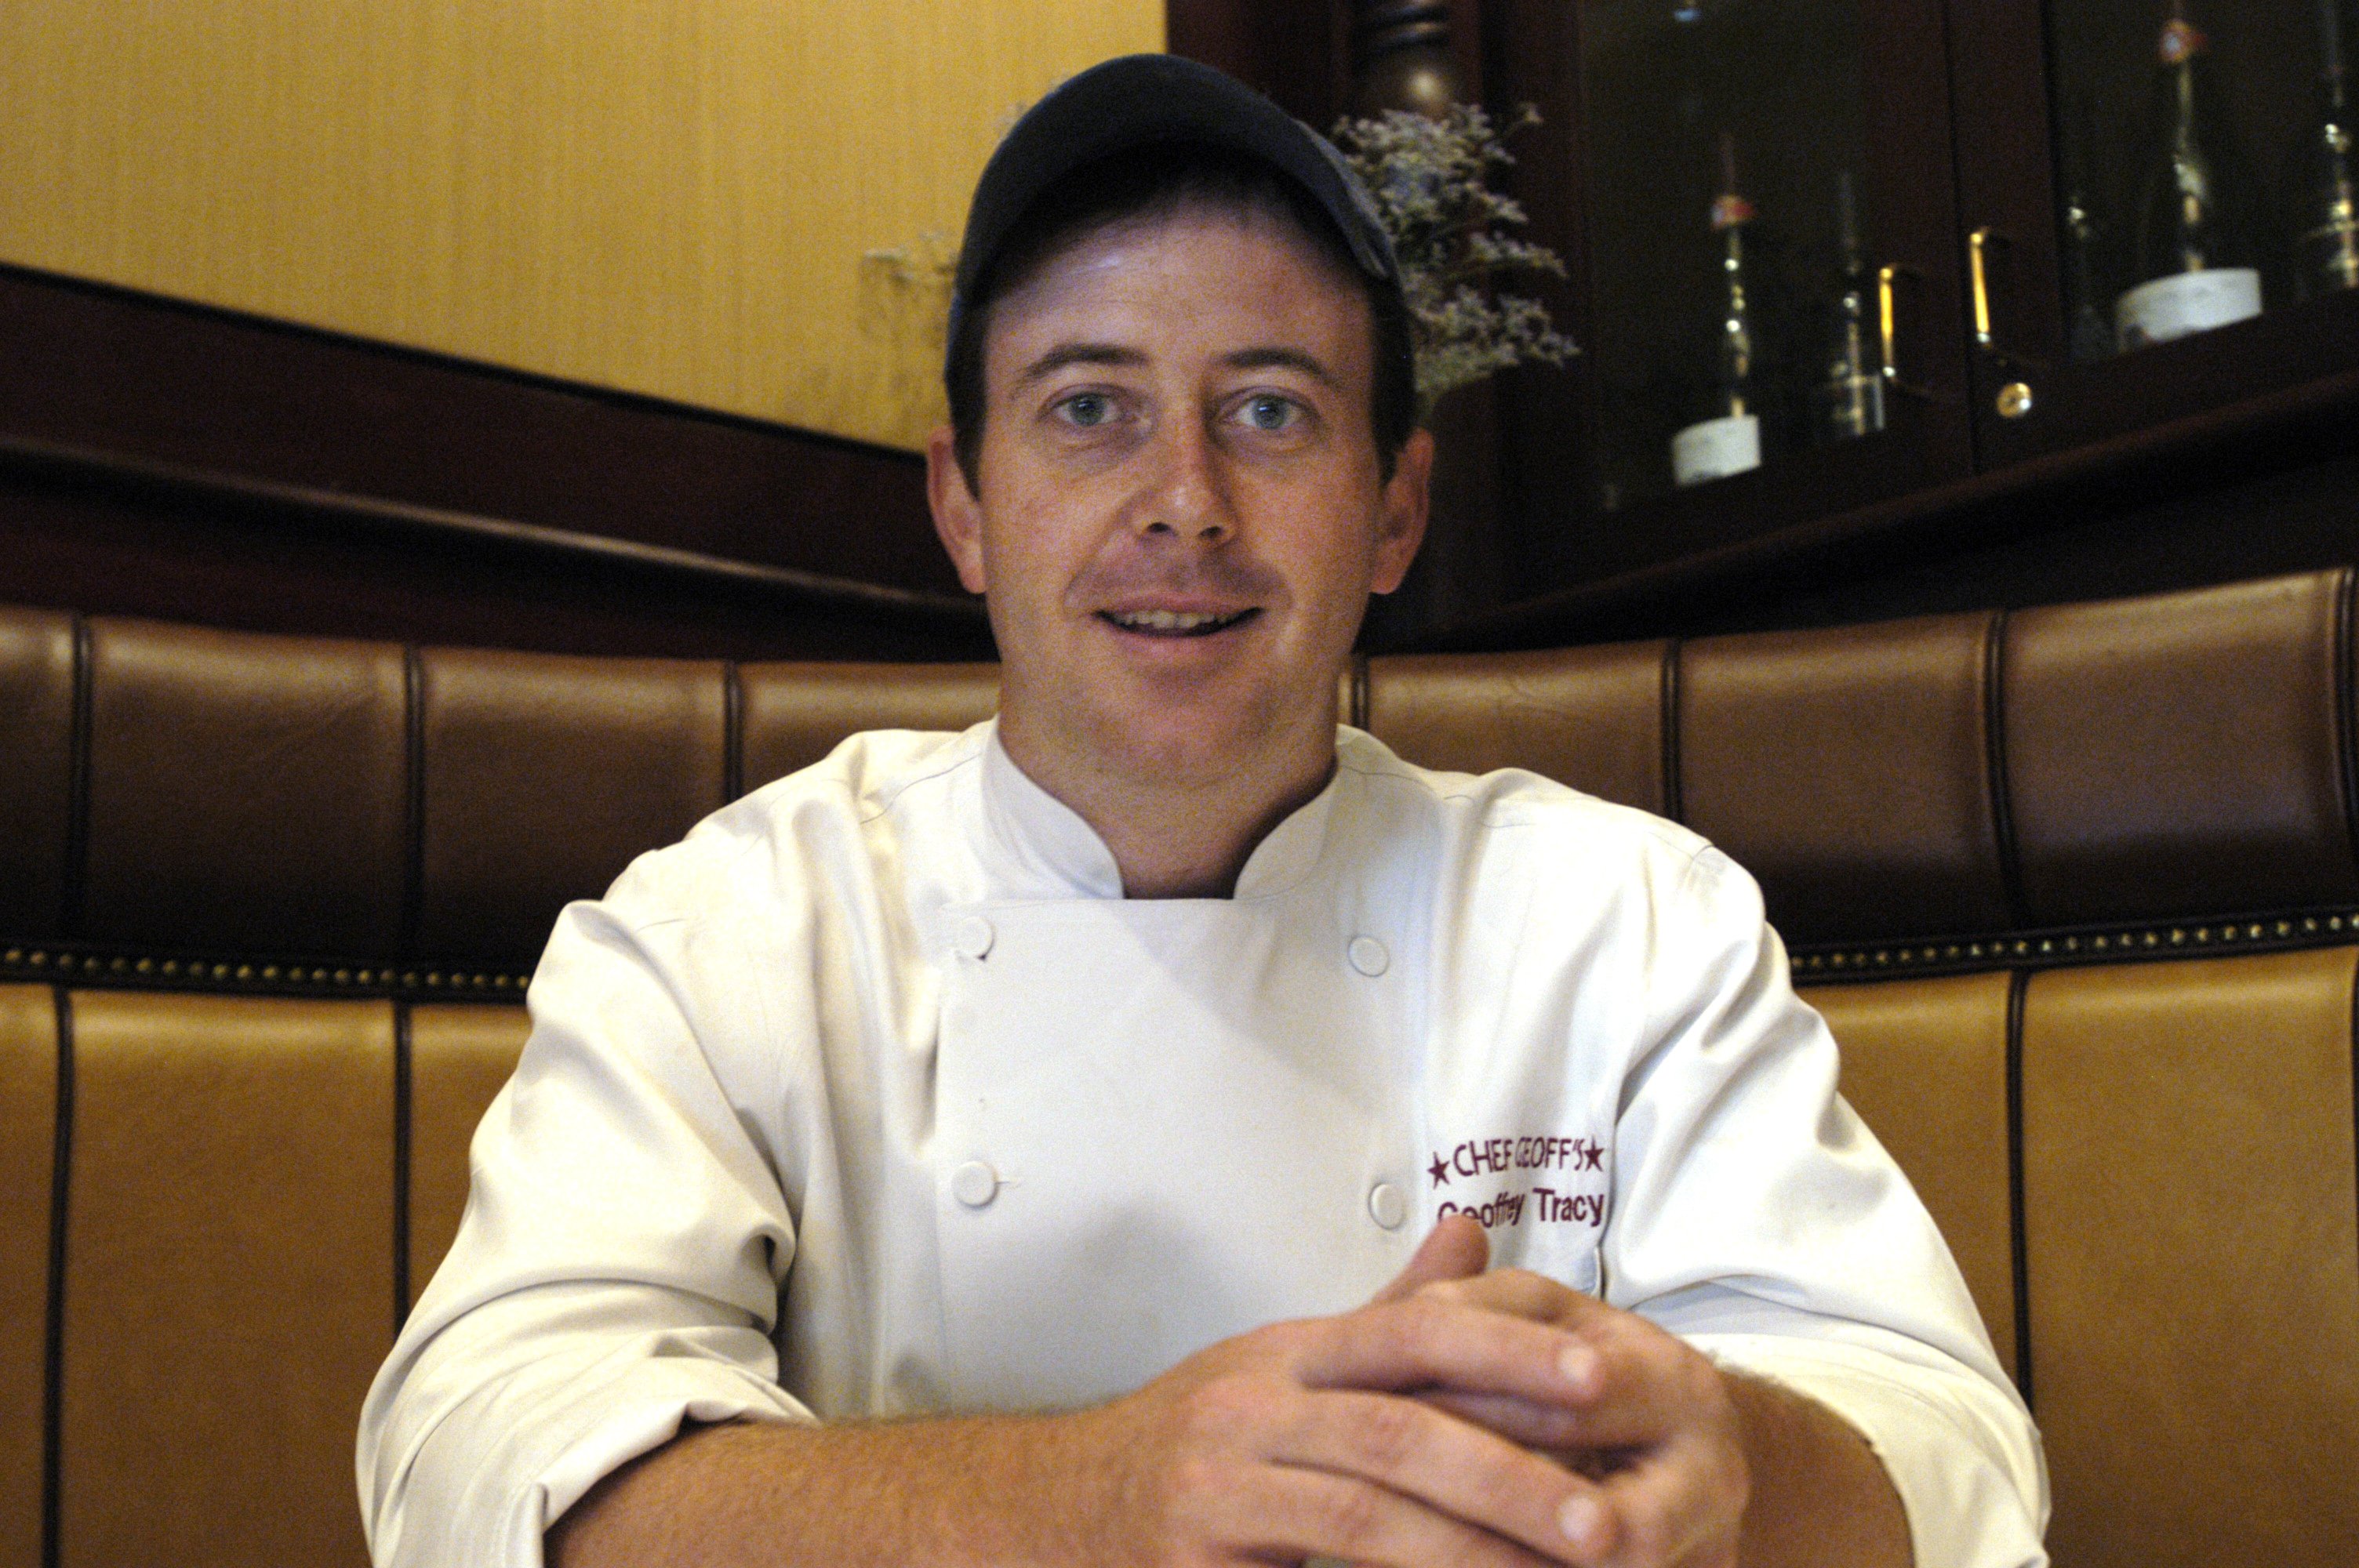 Picture of Chef Geoffrey Tracy of Chef Geoff's restaurant April 20, 2004 | Source: Getty Images